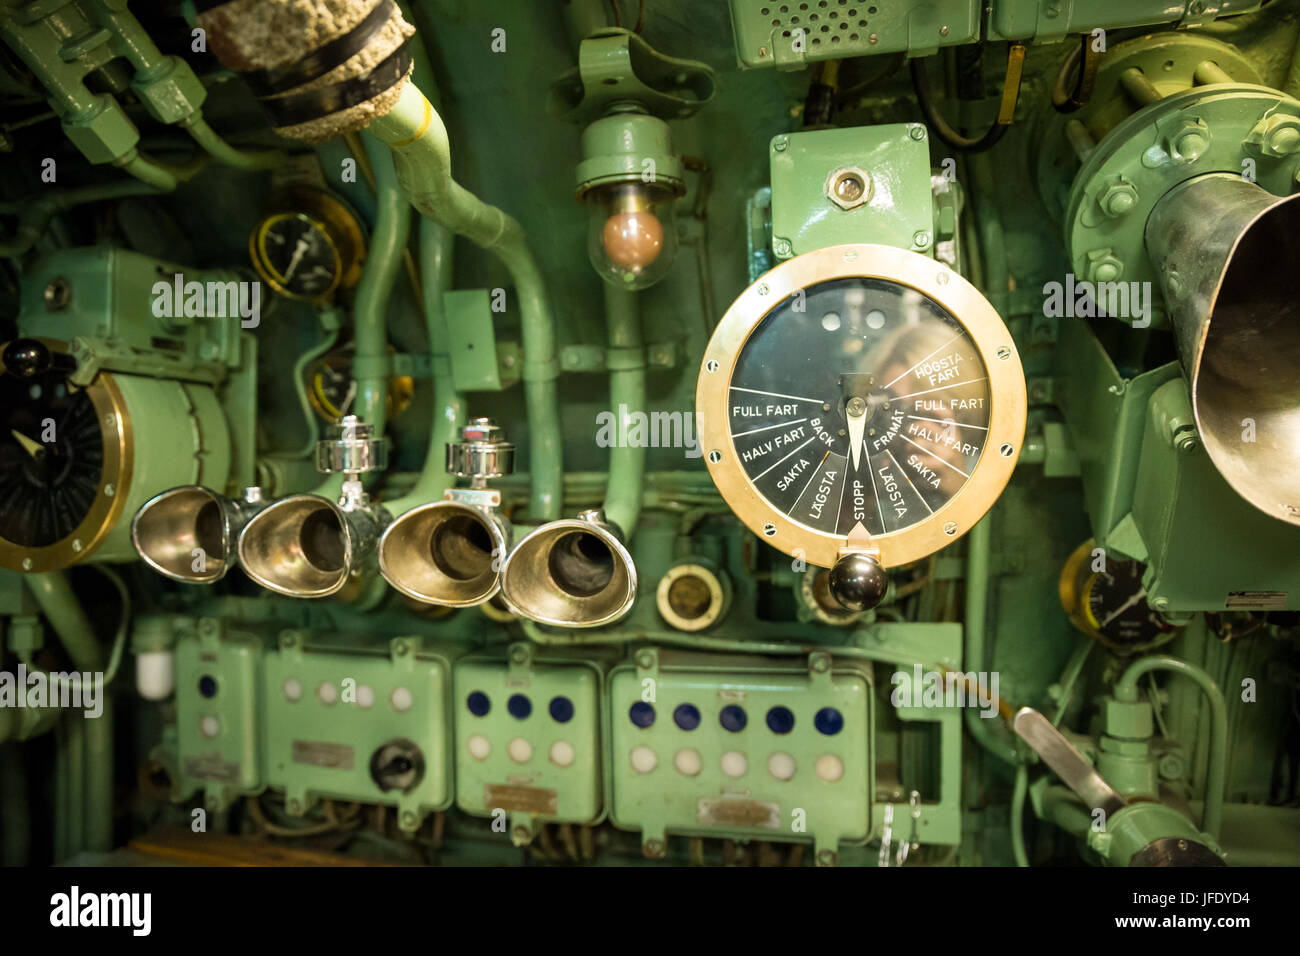 Old Ship Throttle Speed Control and Communication System, Vintage Stock Photo